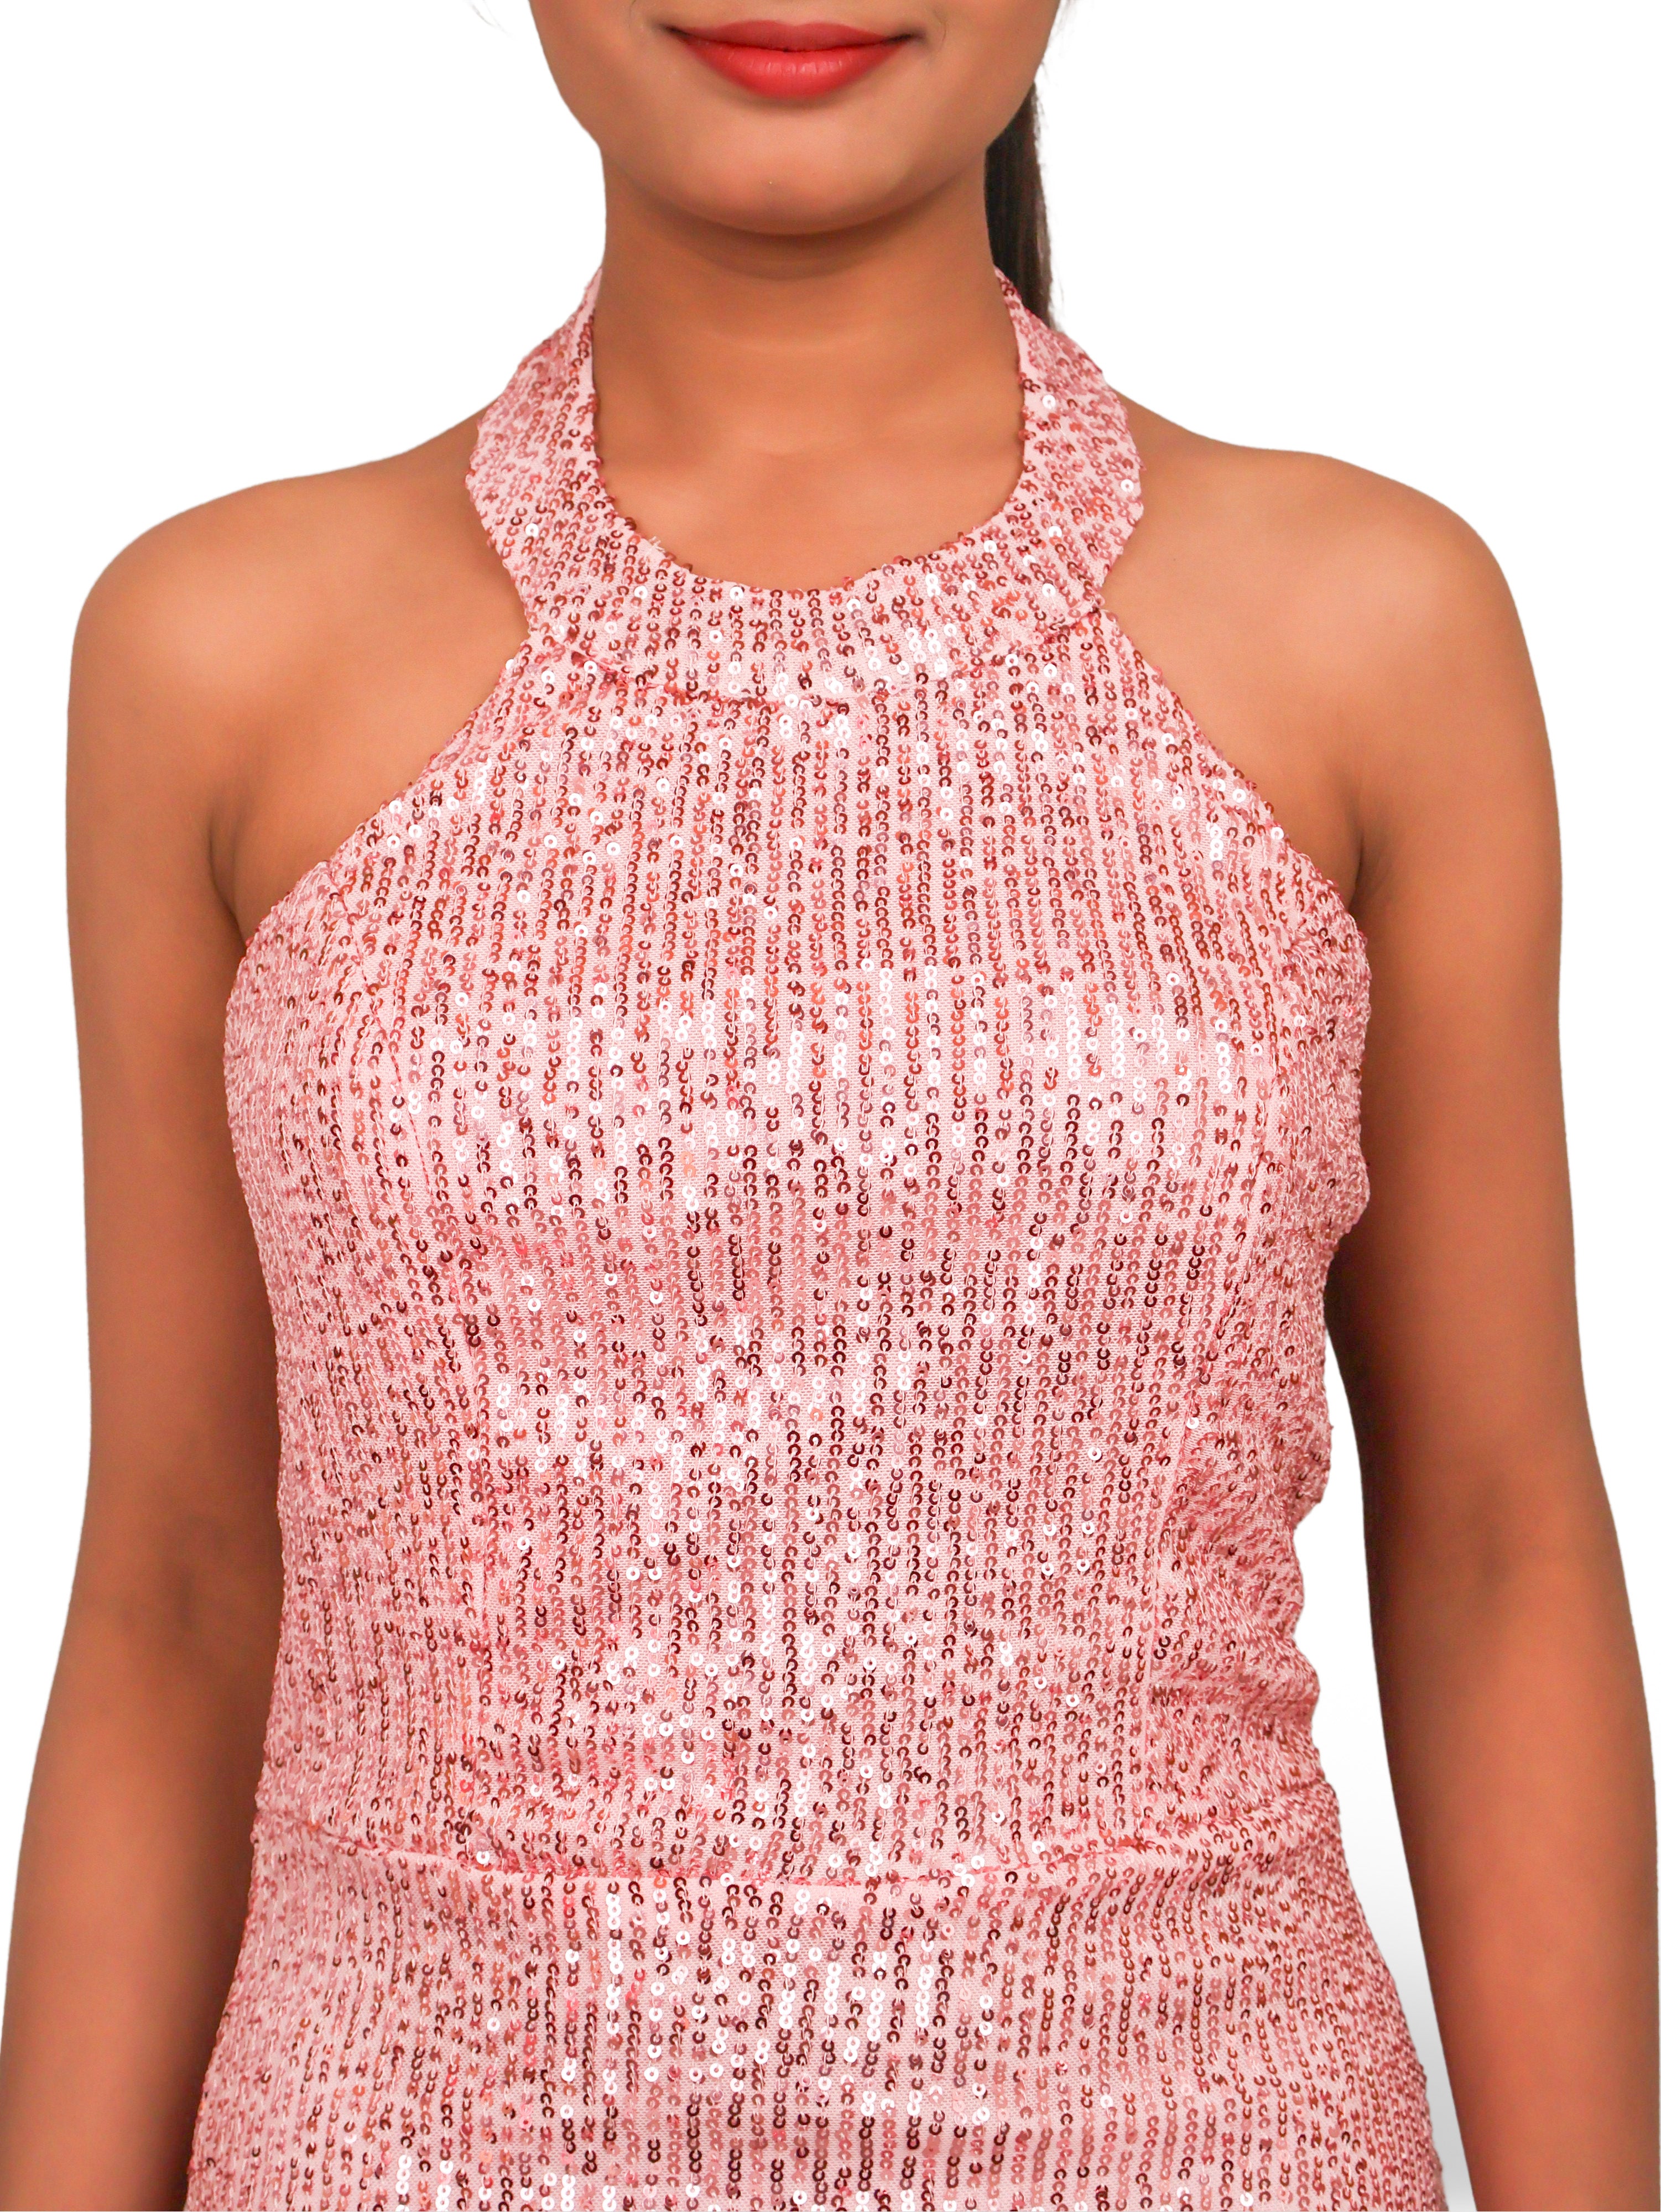 Sparkling Elegance: Halter Neck Pink Sequins Mini Party Dress by Shreekama Pink Dress for Party Festival Wedding Occasion in Noida